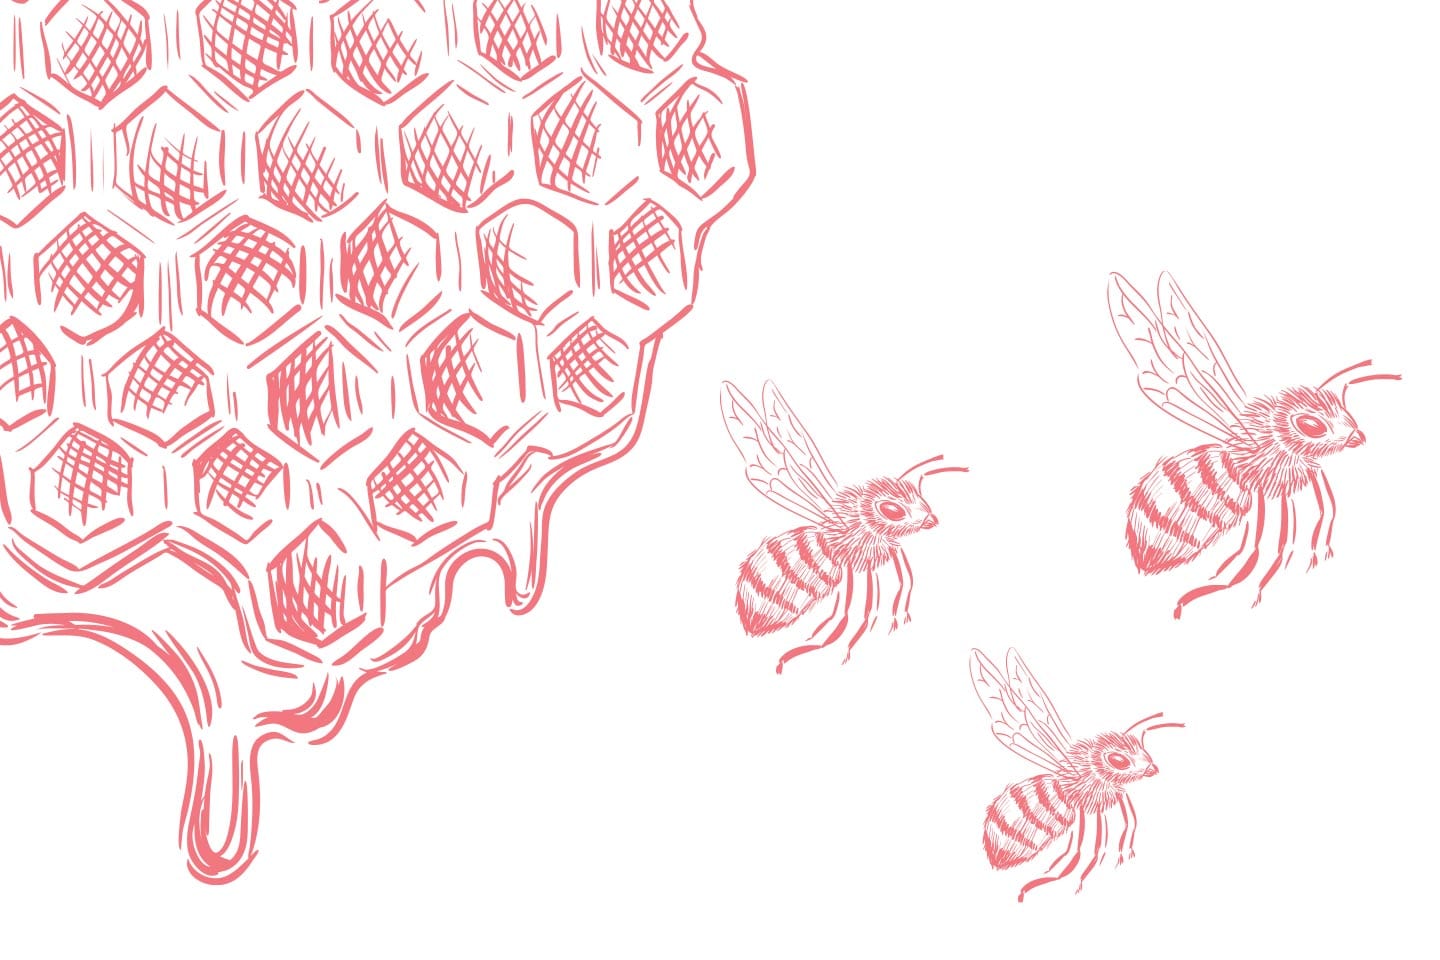 Illustration of bees flying away from a honeycomb